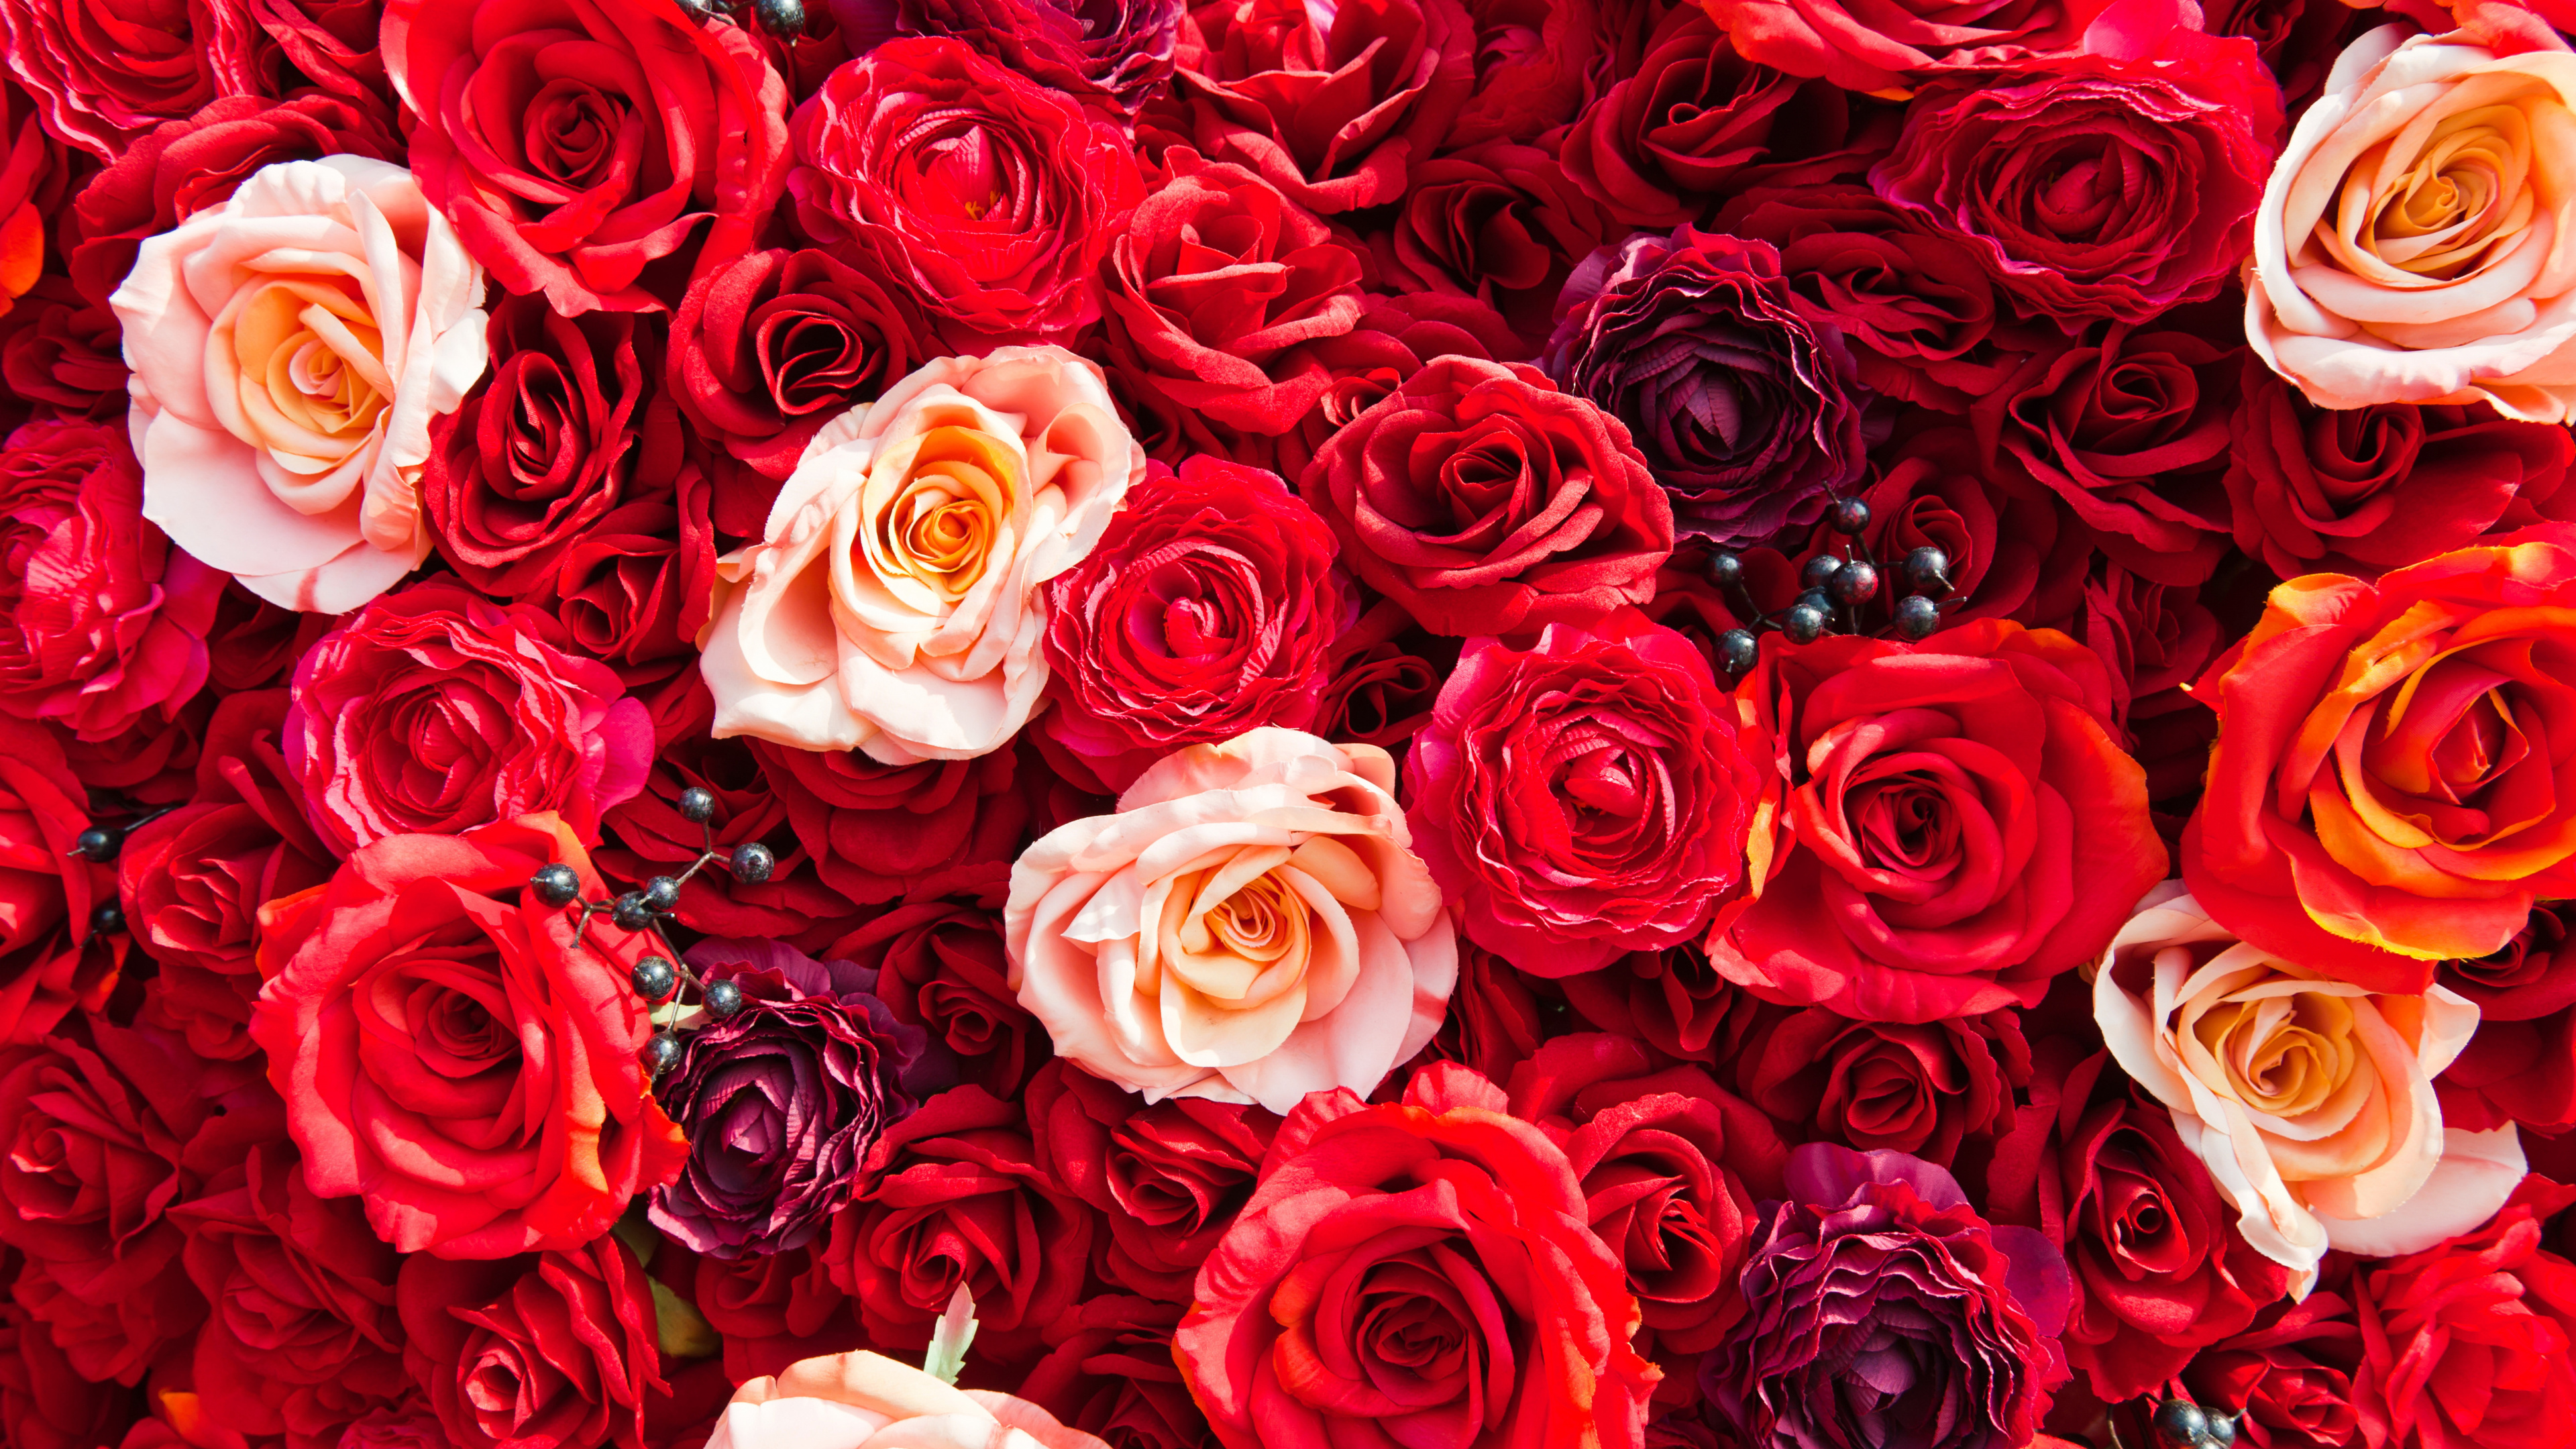 Red and White Roses Bouquet. Wallpaper in 3840x2160 Resolution